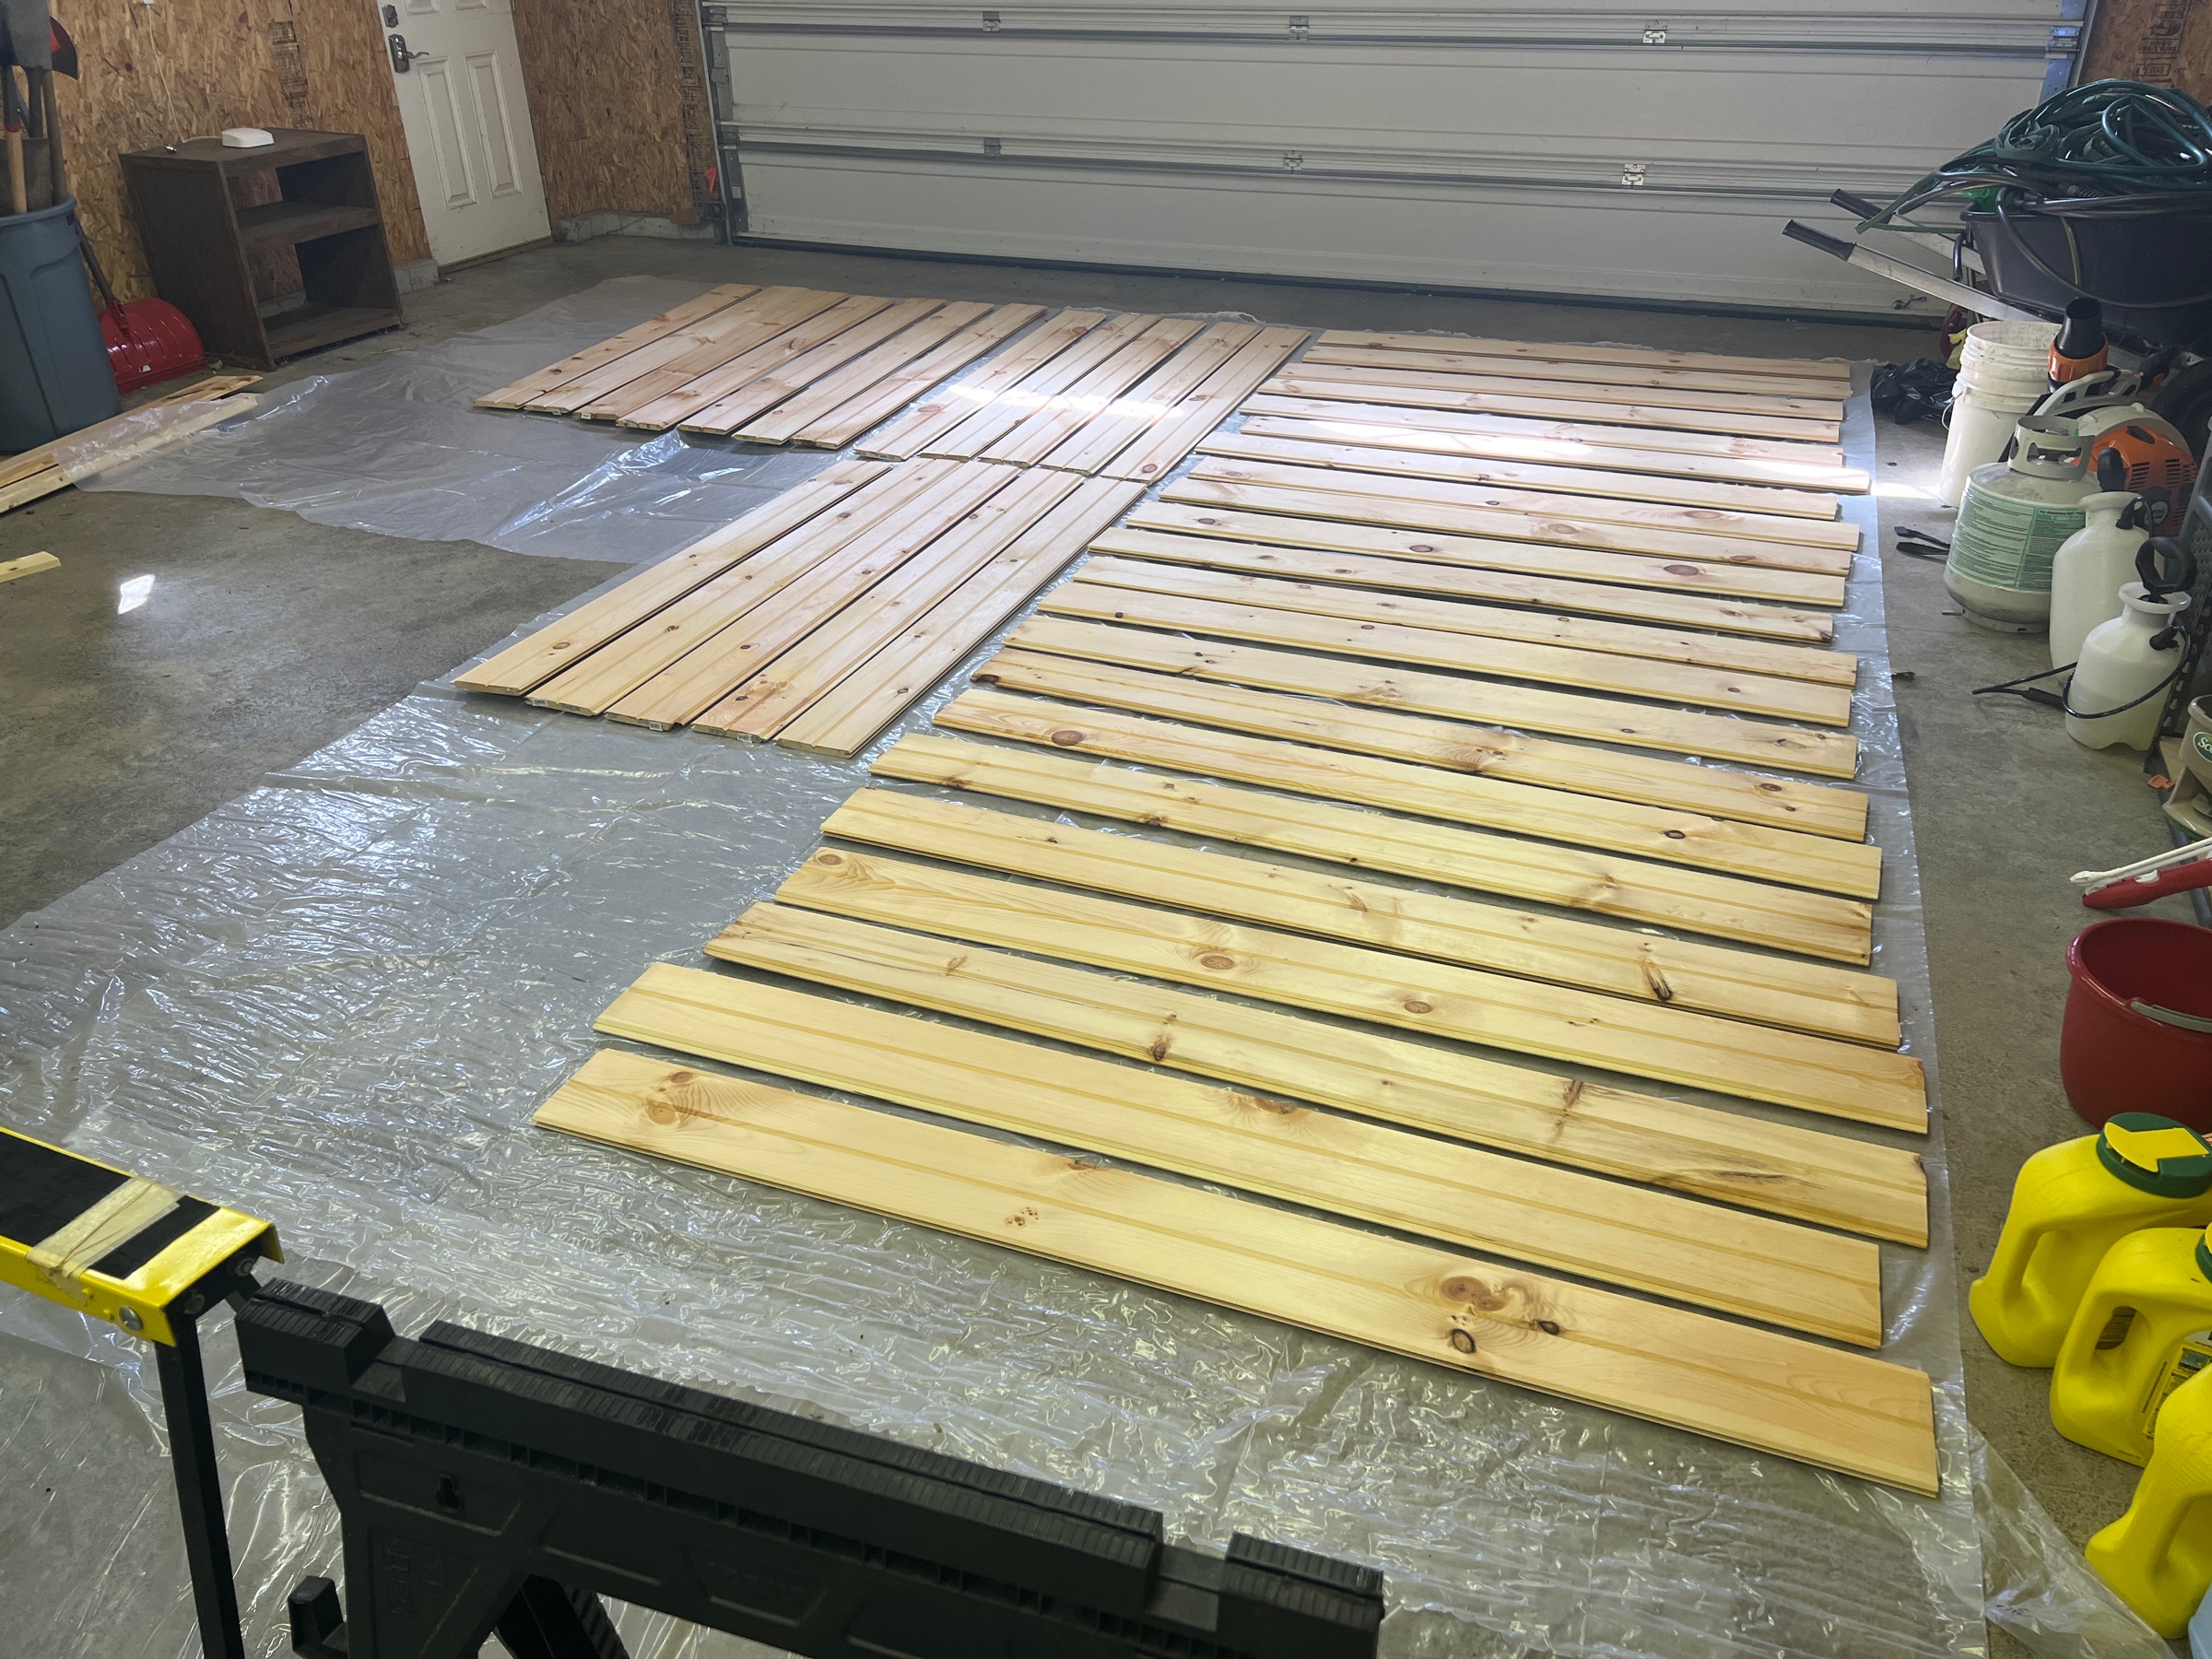 About 40 planks of tongue-and-groove knotty pine, laying on plastic sheets on a garage floor